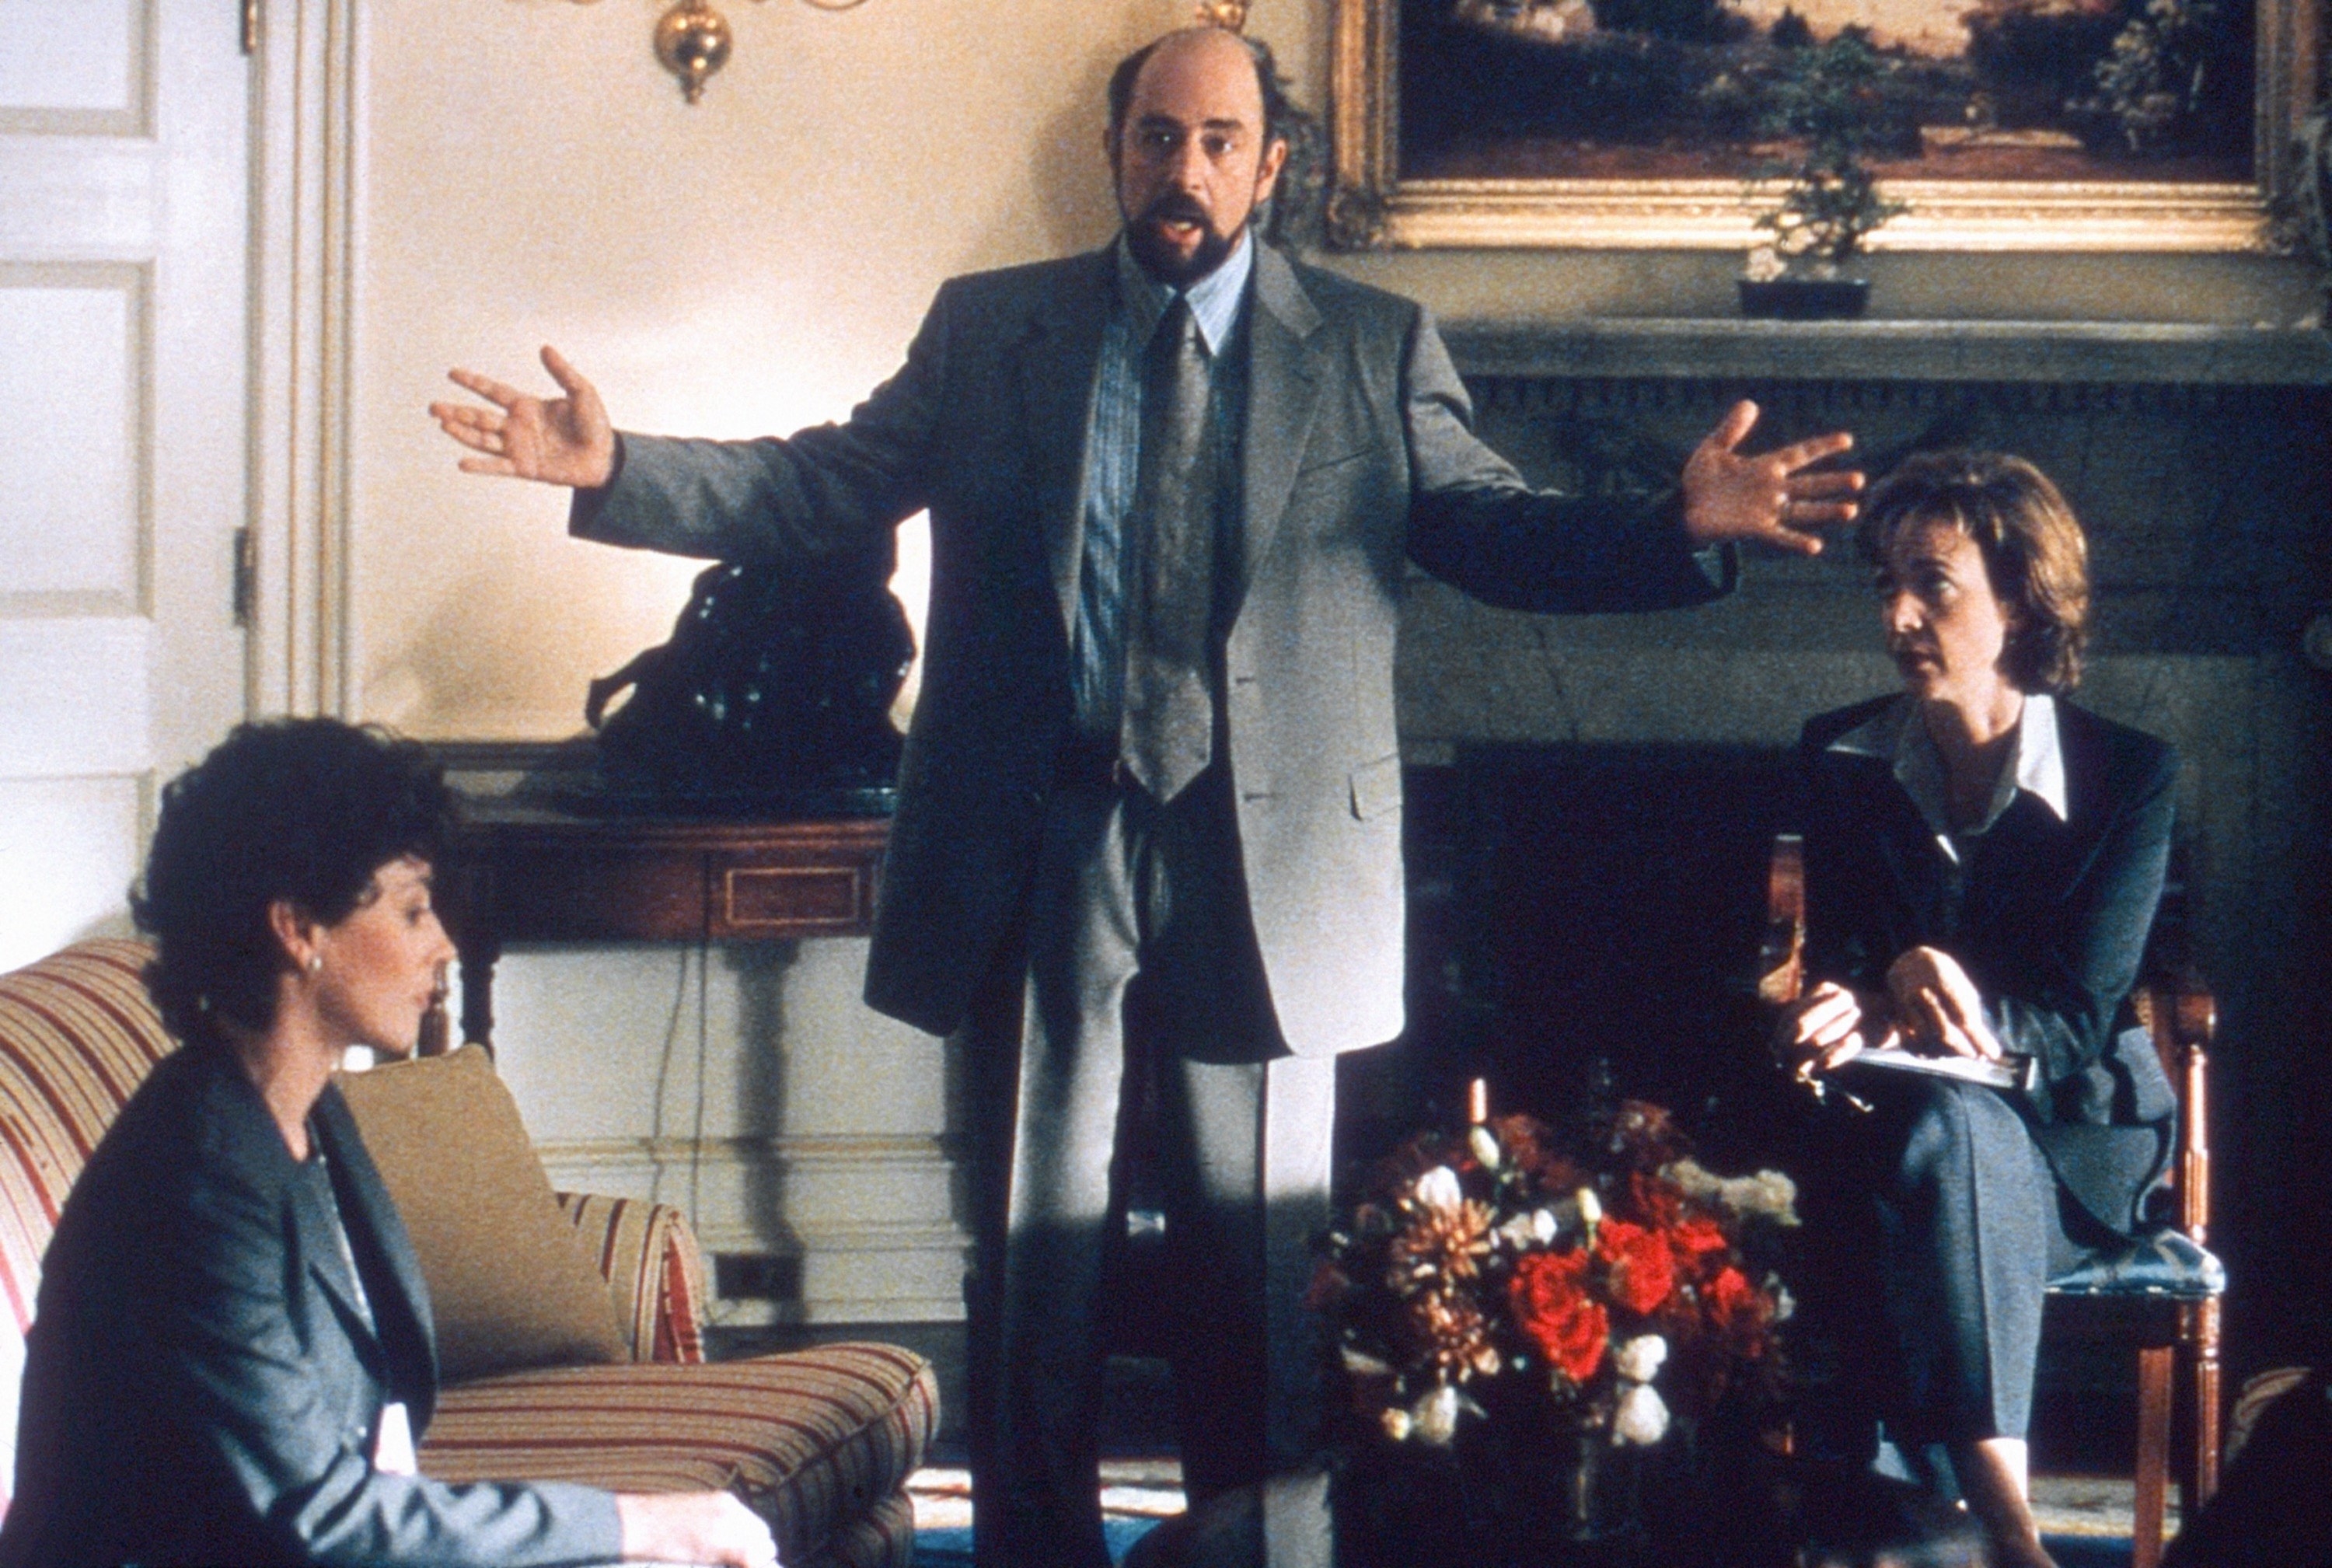 Toby with his arms stretched out while he talks in the oval office